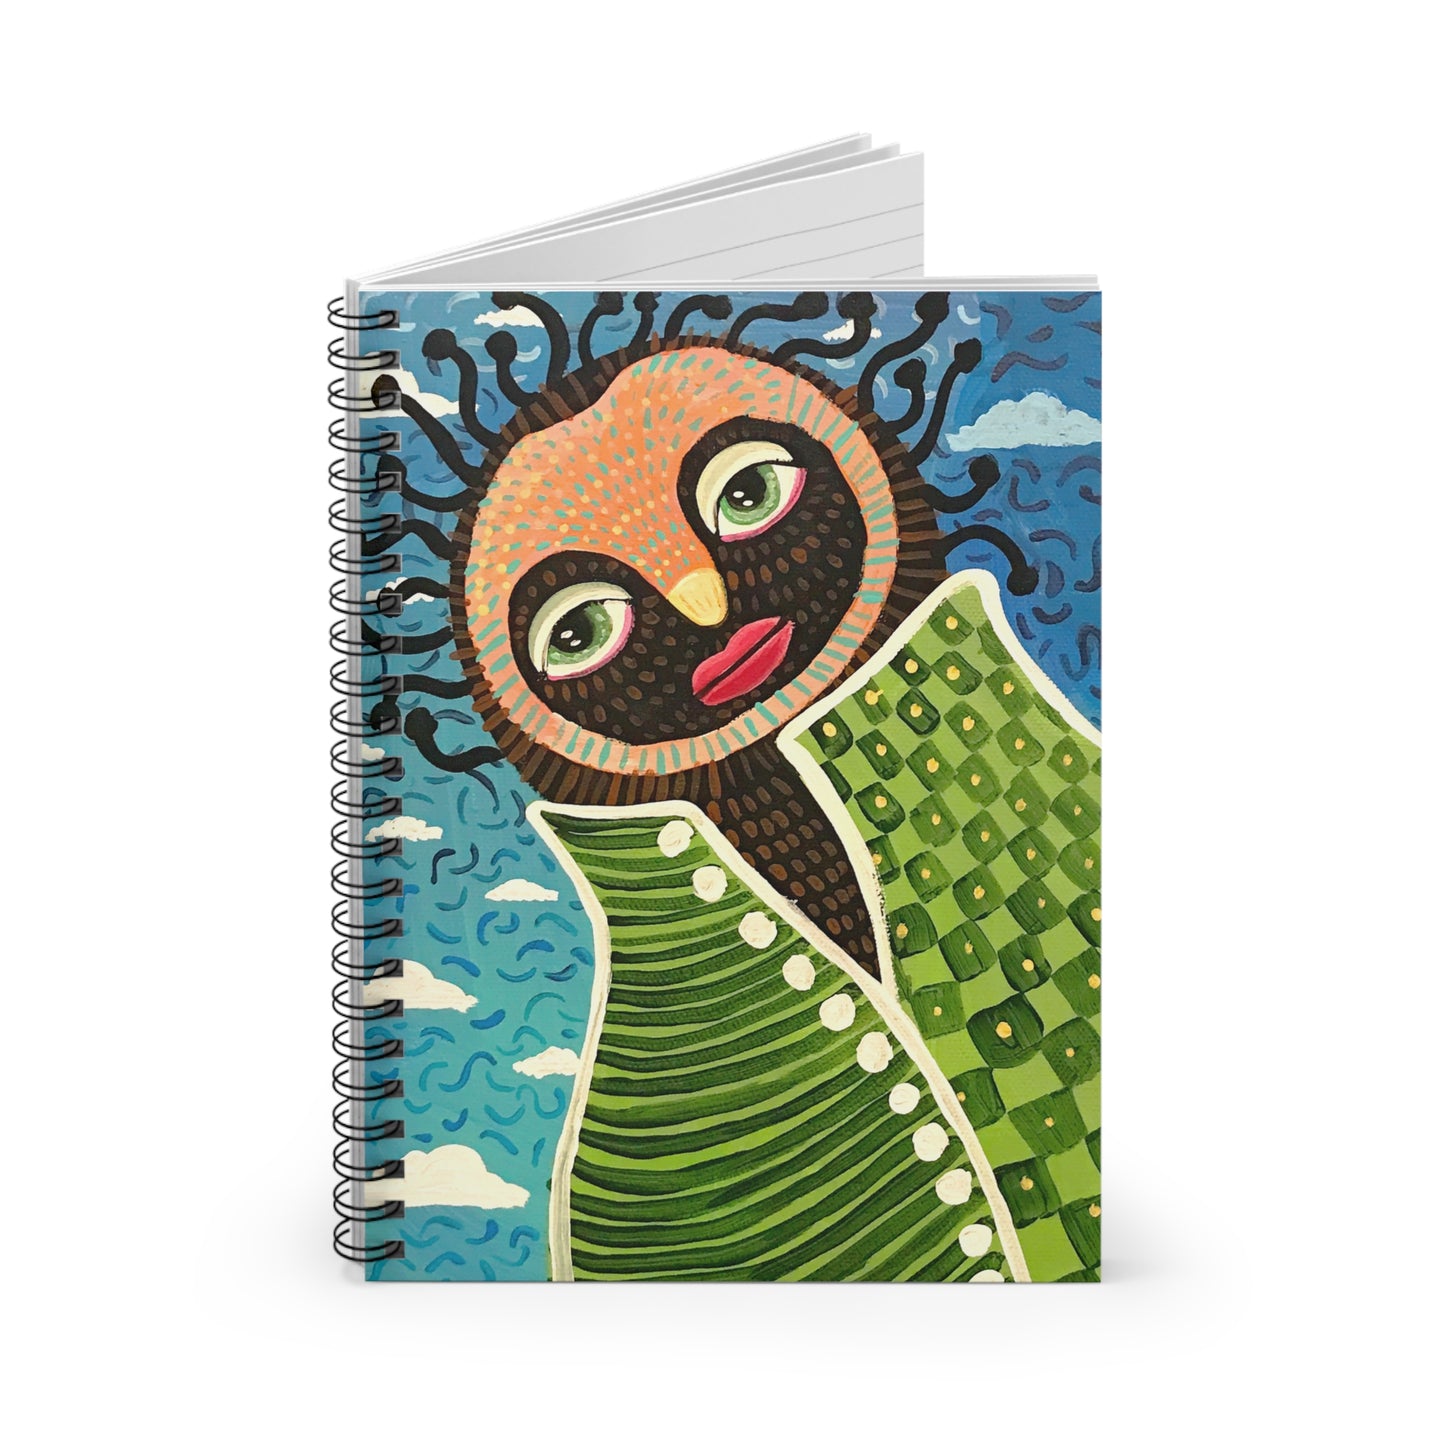 I'm Not Convinced Spiral Notebook